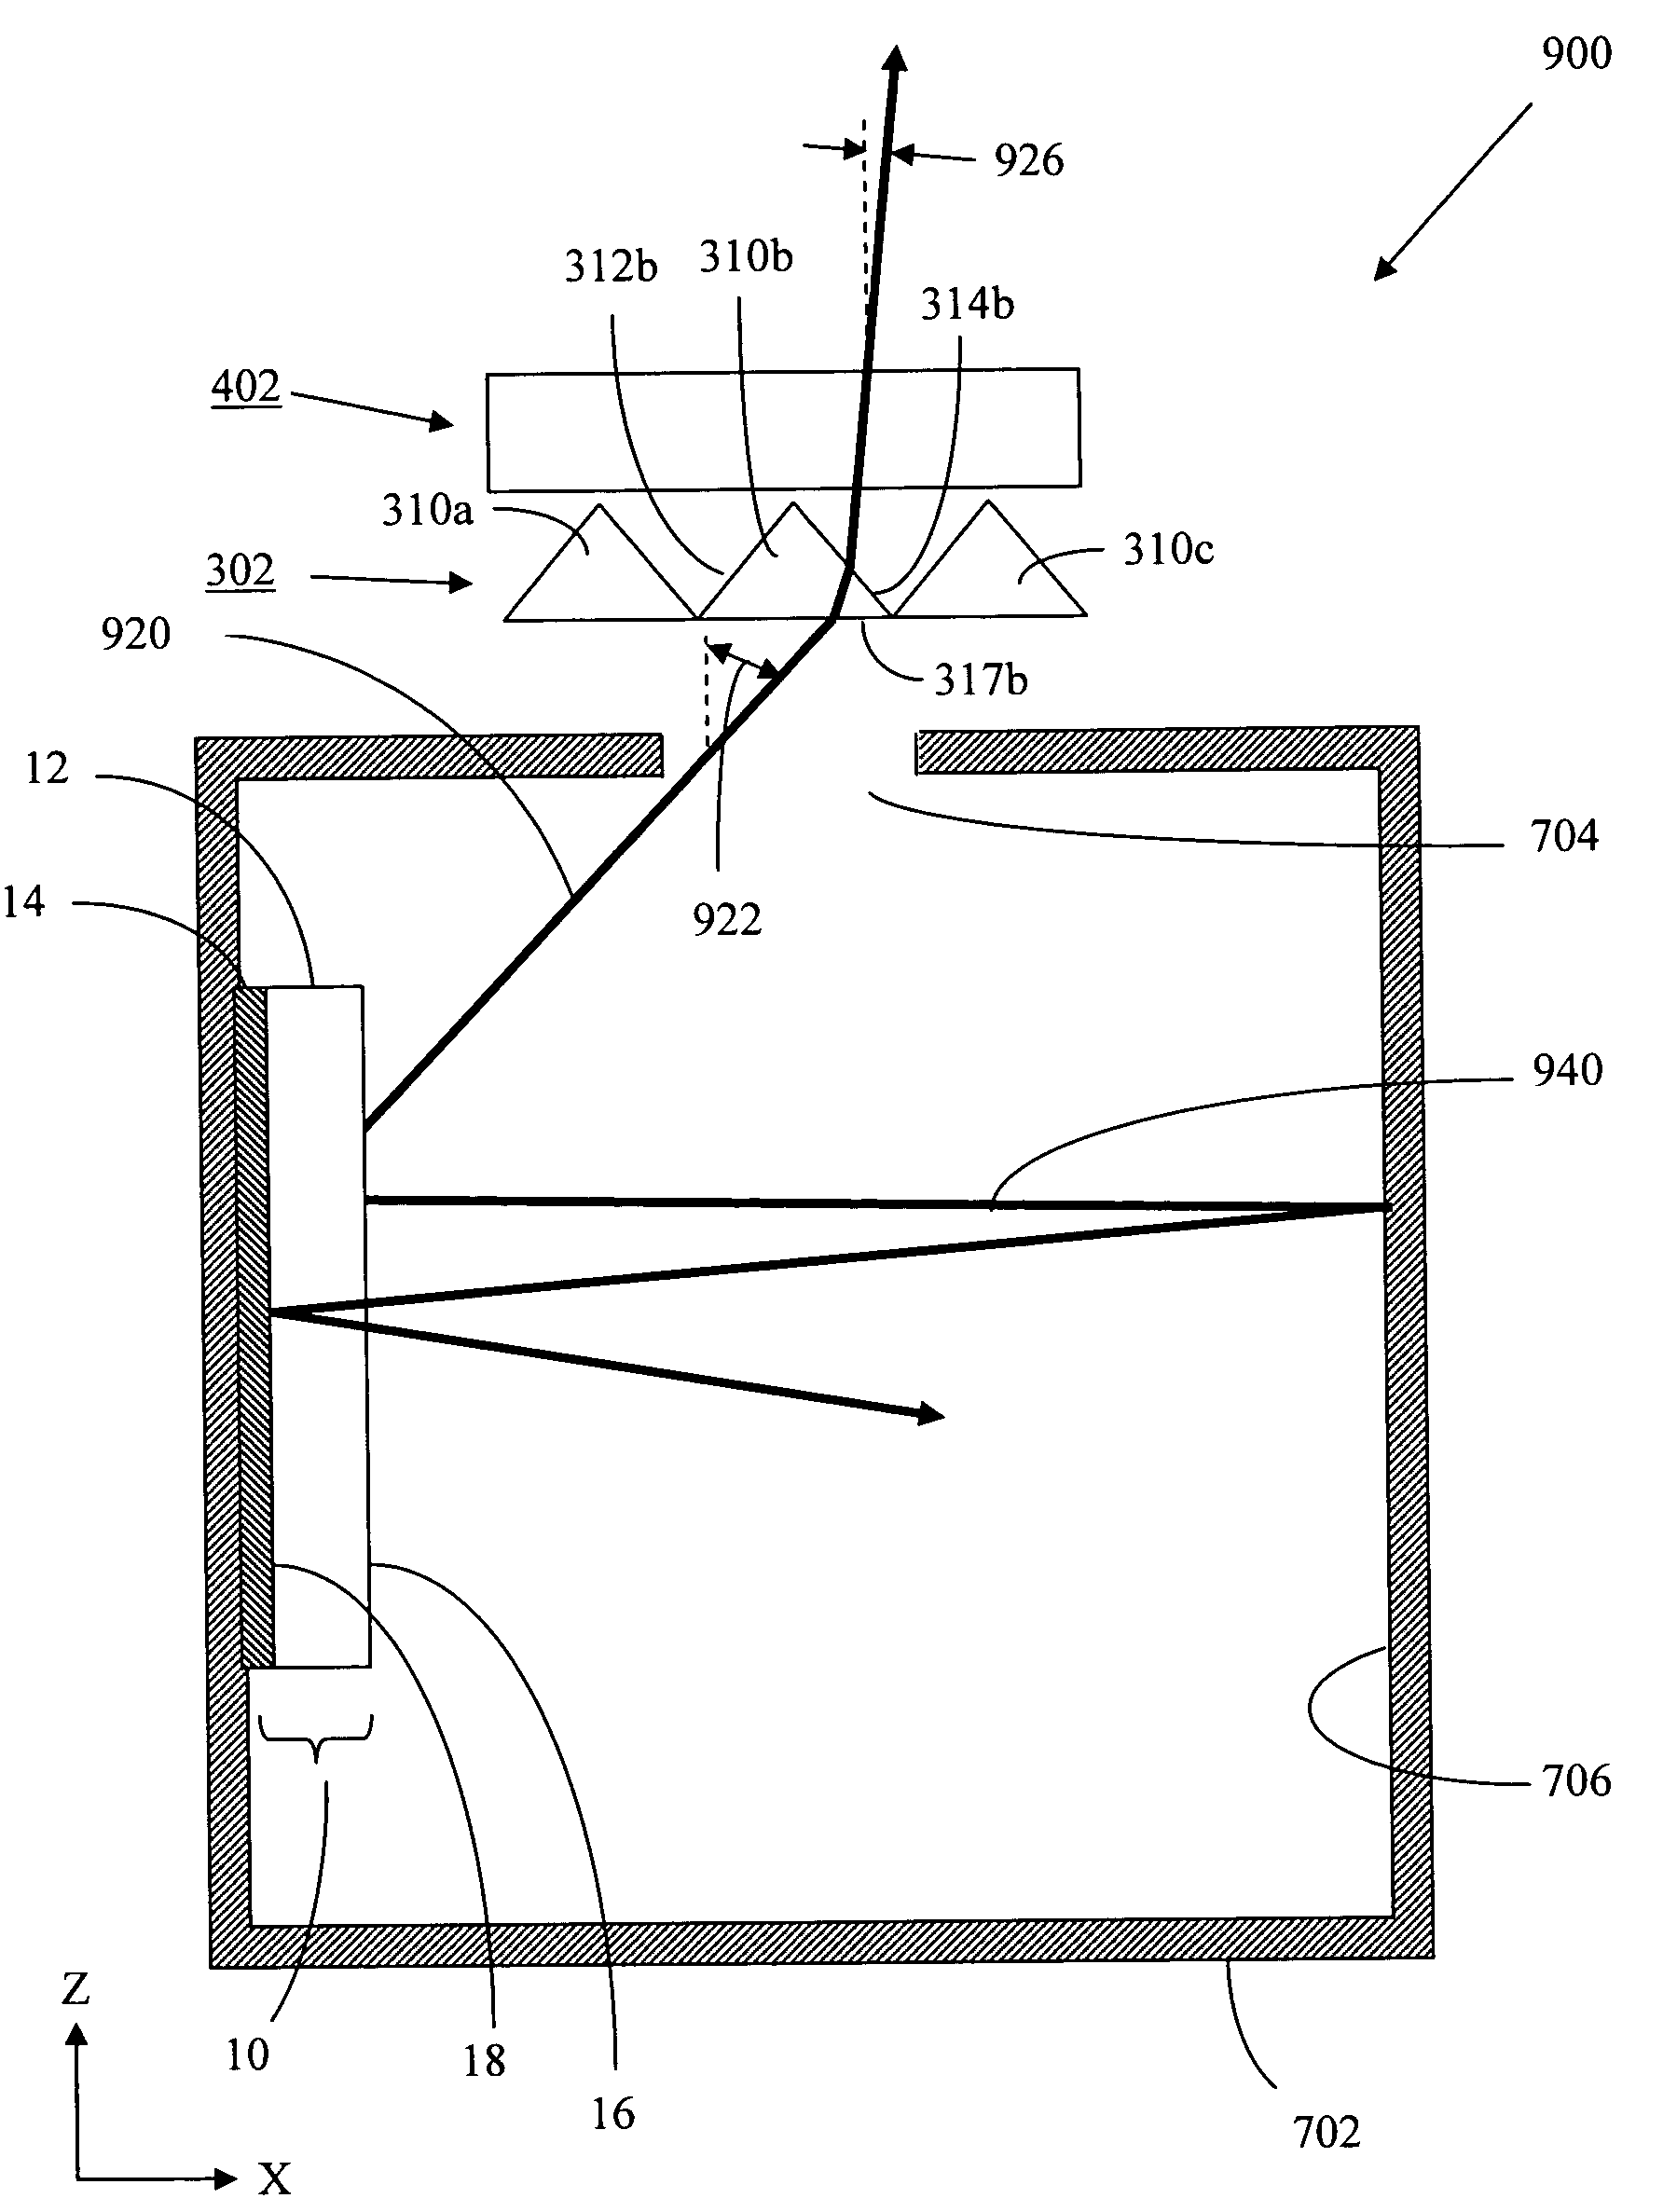 Light recycling illumination systems having restricted angular output